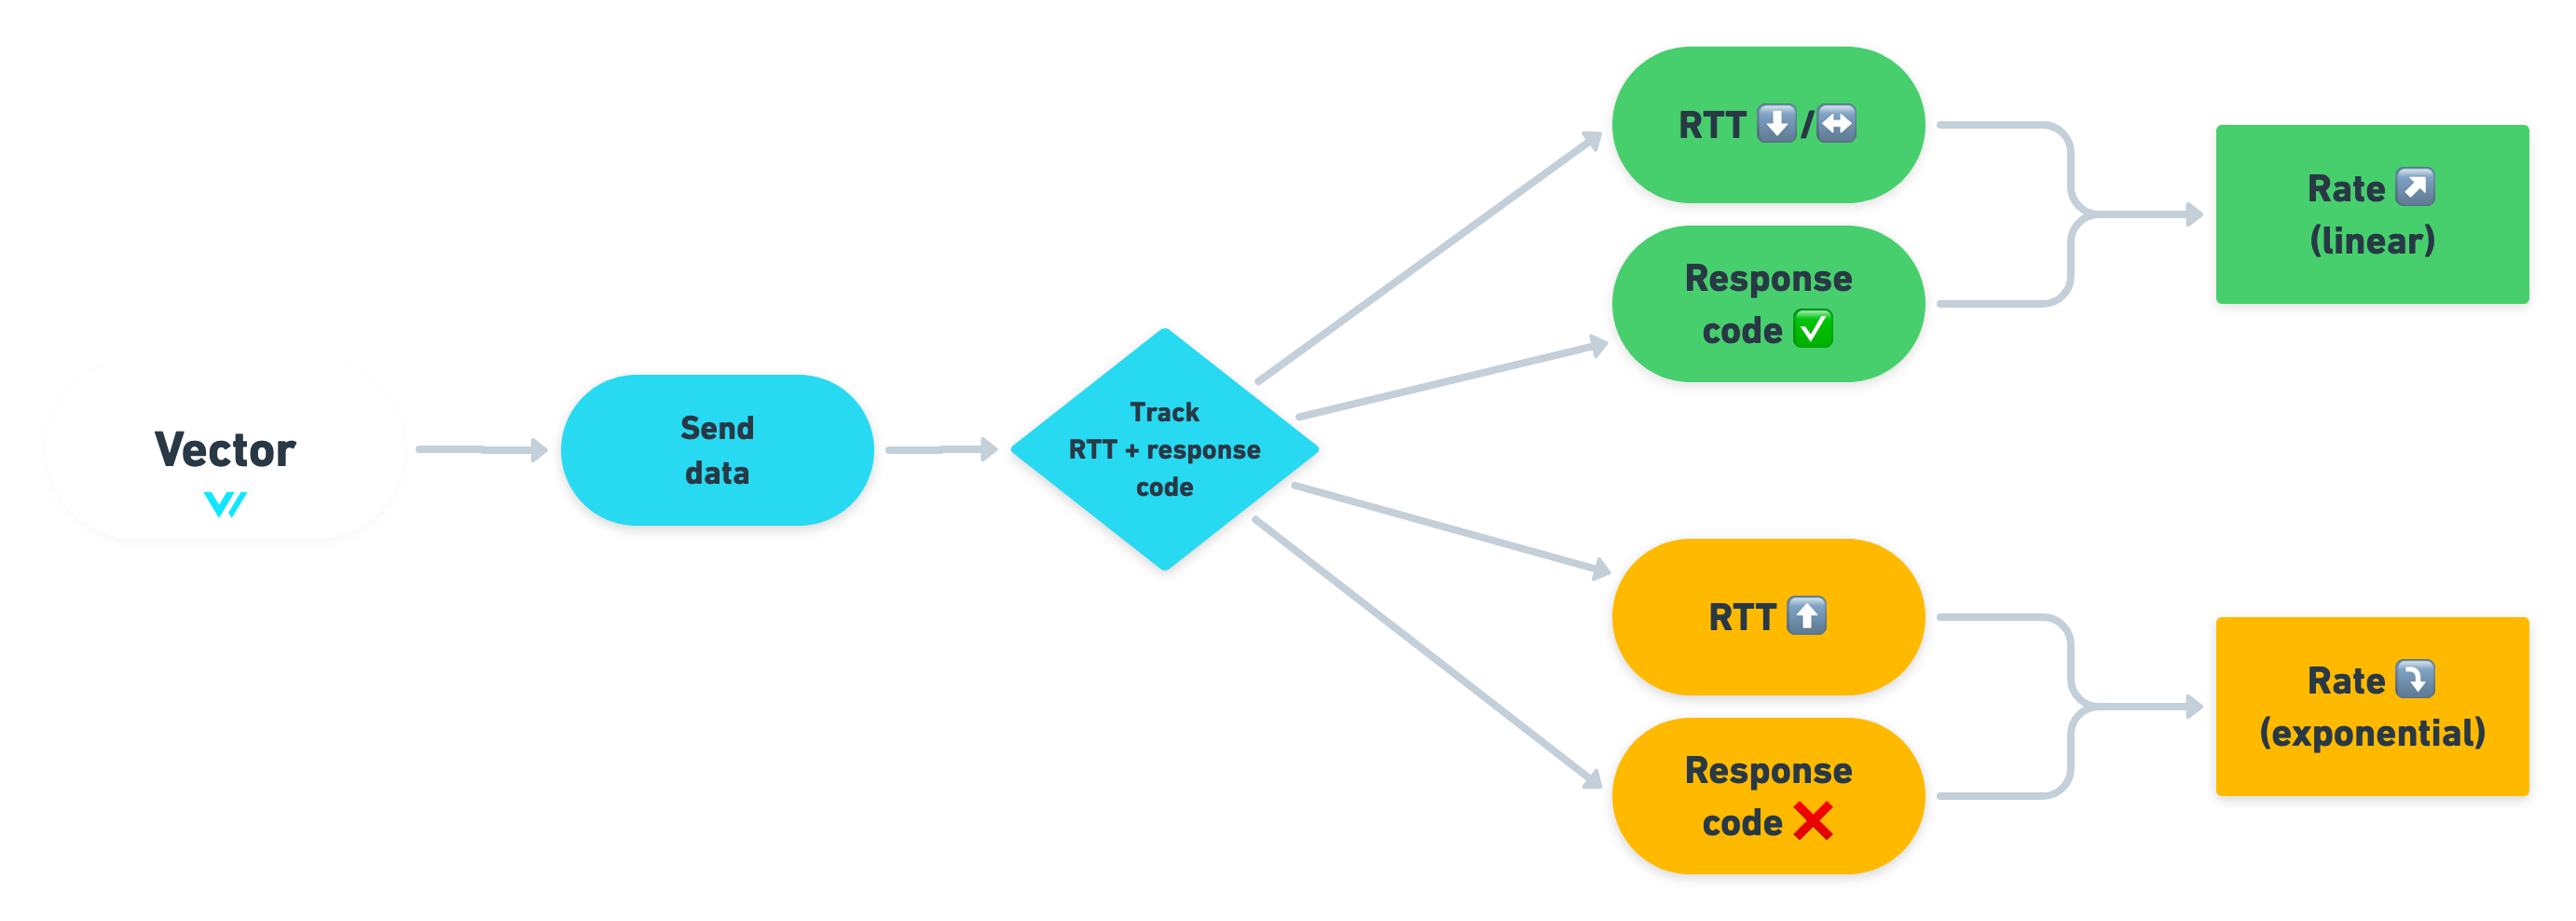 The Adaptive Request Concurrency decision chart